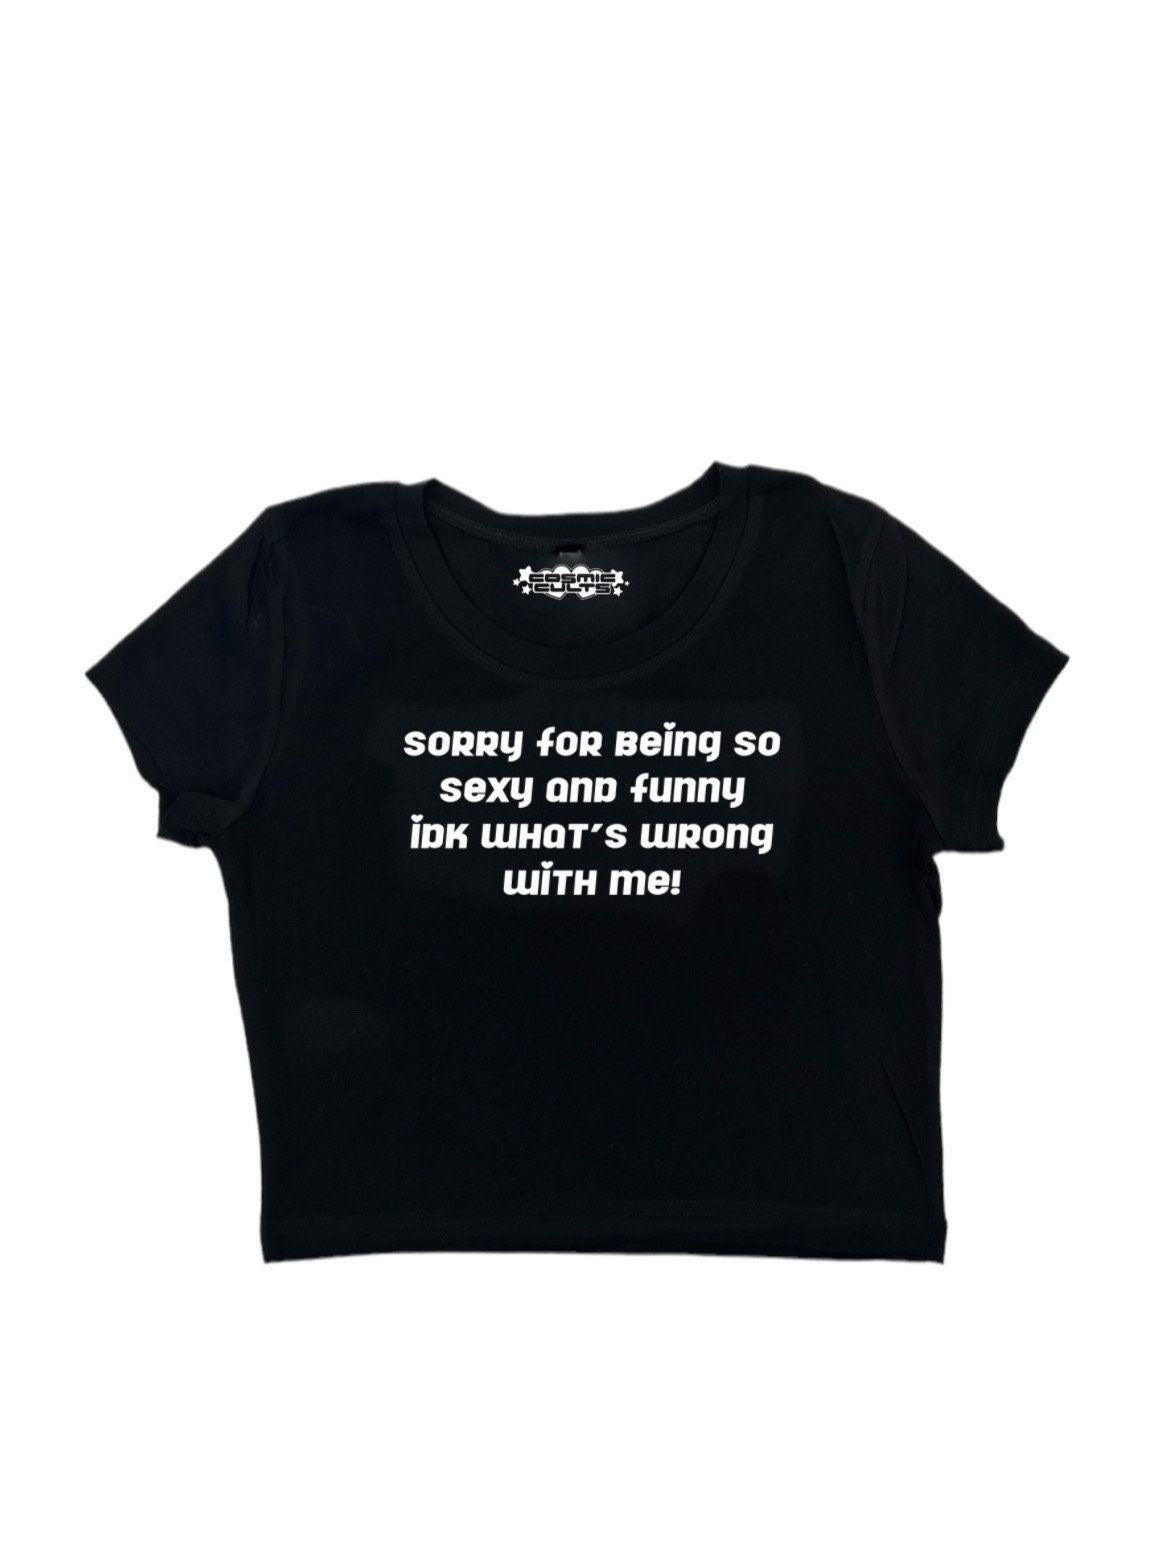 Sorry For Being So Sexy And Funny Idk Whats Wrong With Me Y2K crop top tee shirt